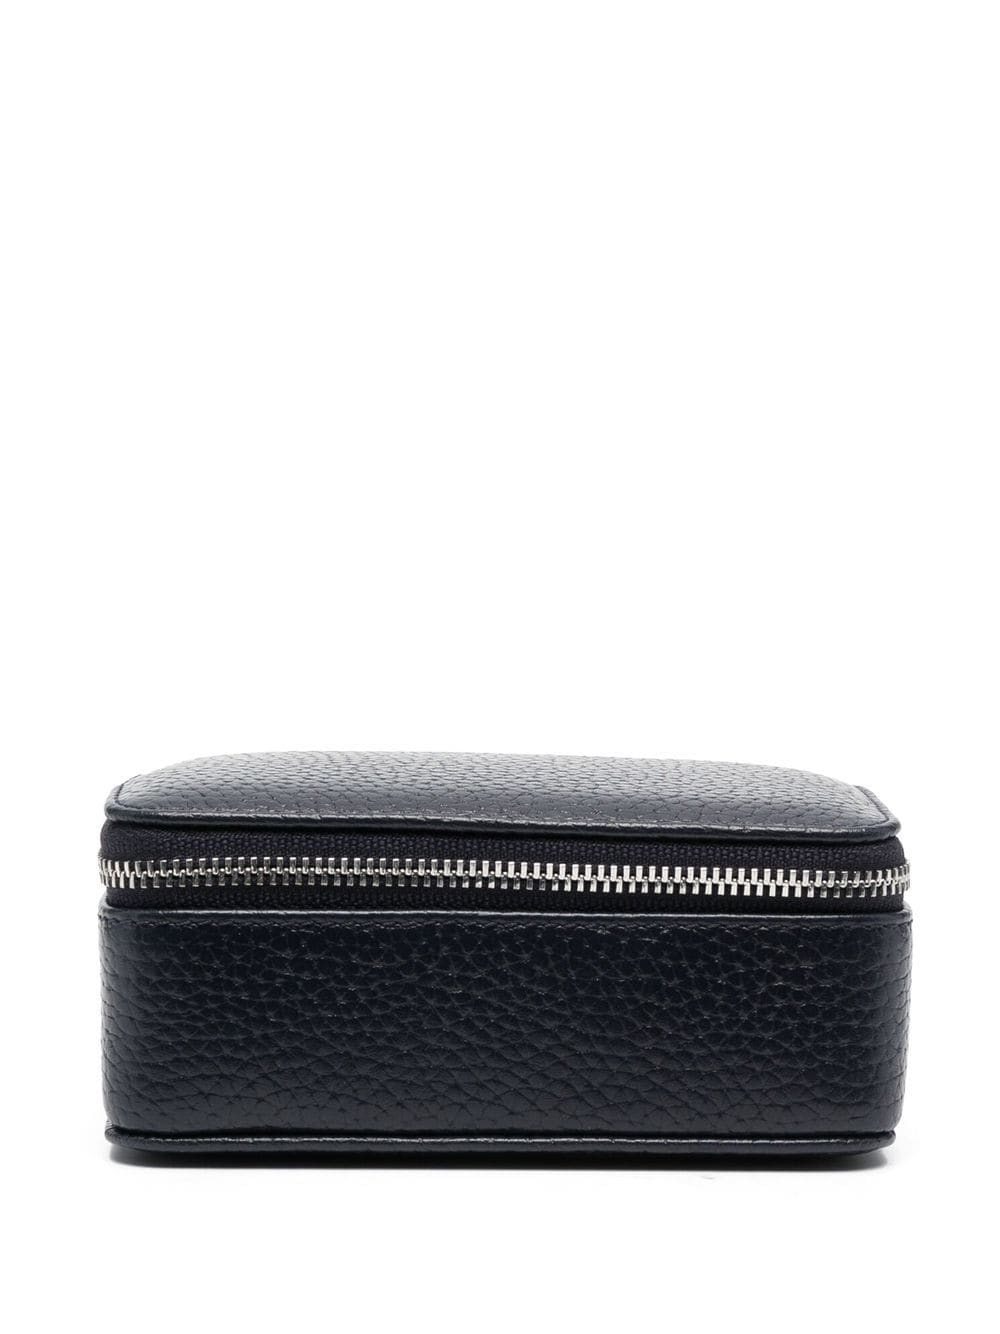 Aspinal Of London grained travel jewellery case - Blue von Aspinal Of London